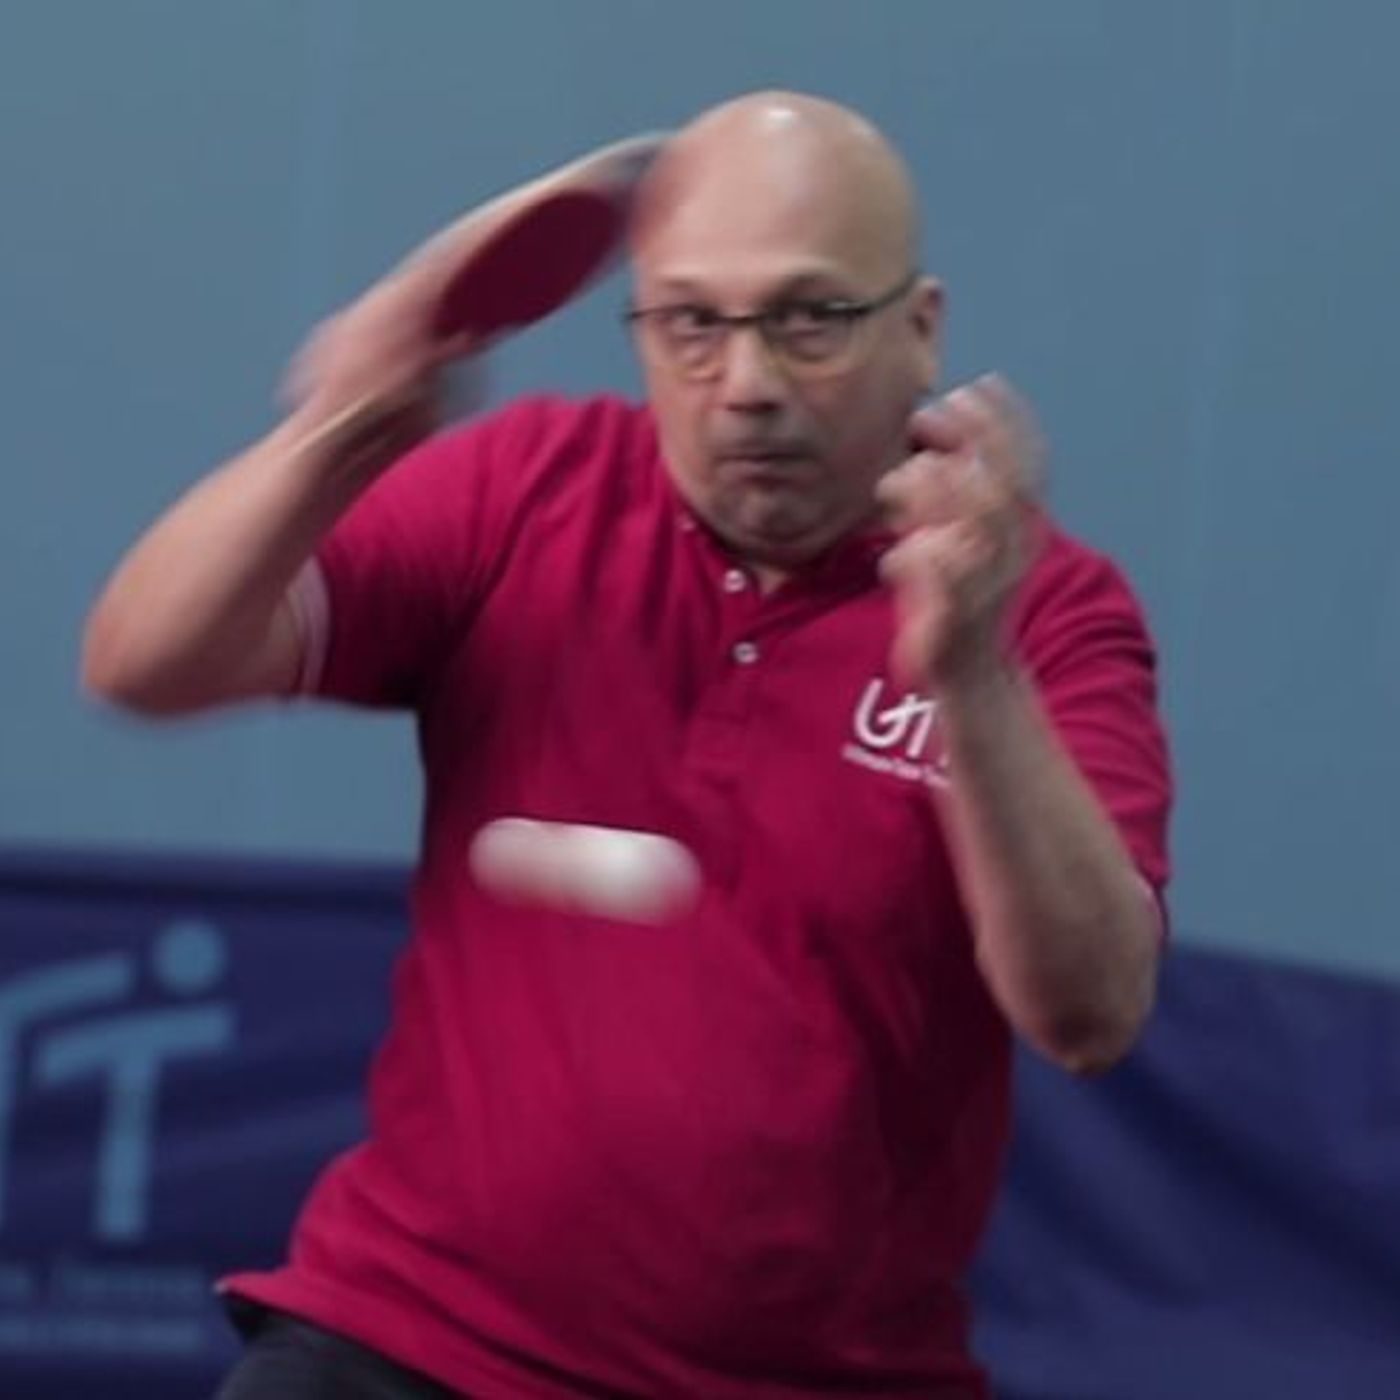 20: Firstpost Masterclass, Episode 20: Forehand topspin to aggressive play, Kamlesh Mehta explains intricacies of table tennis